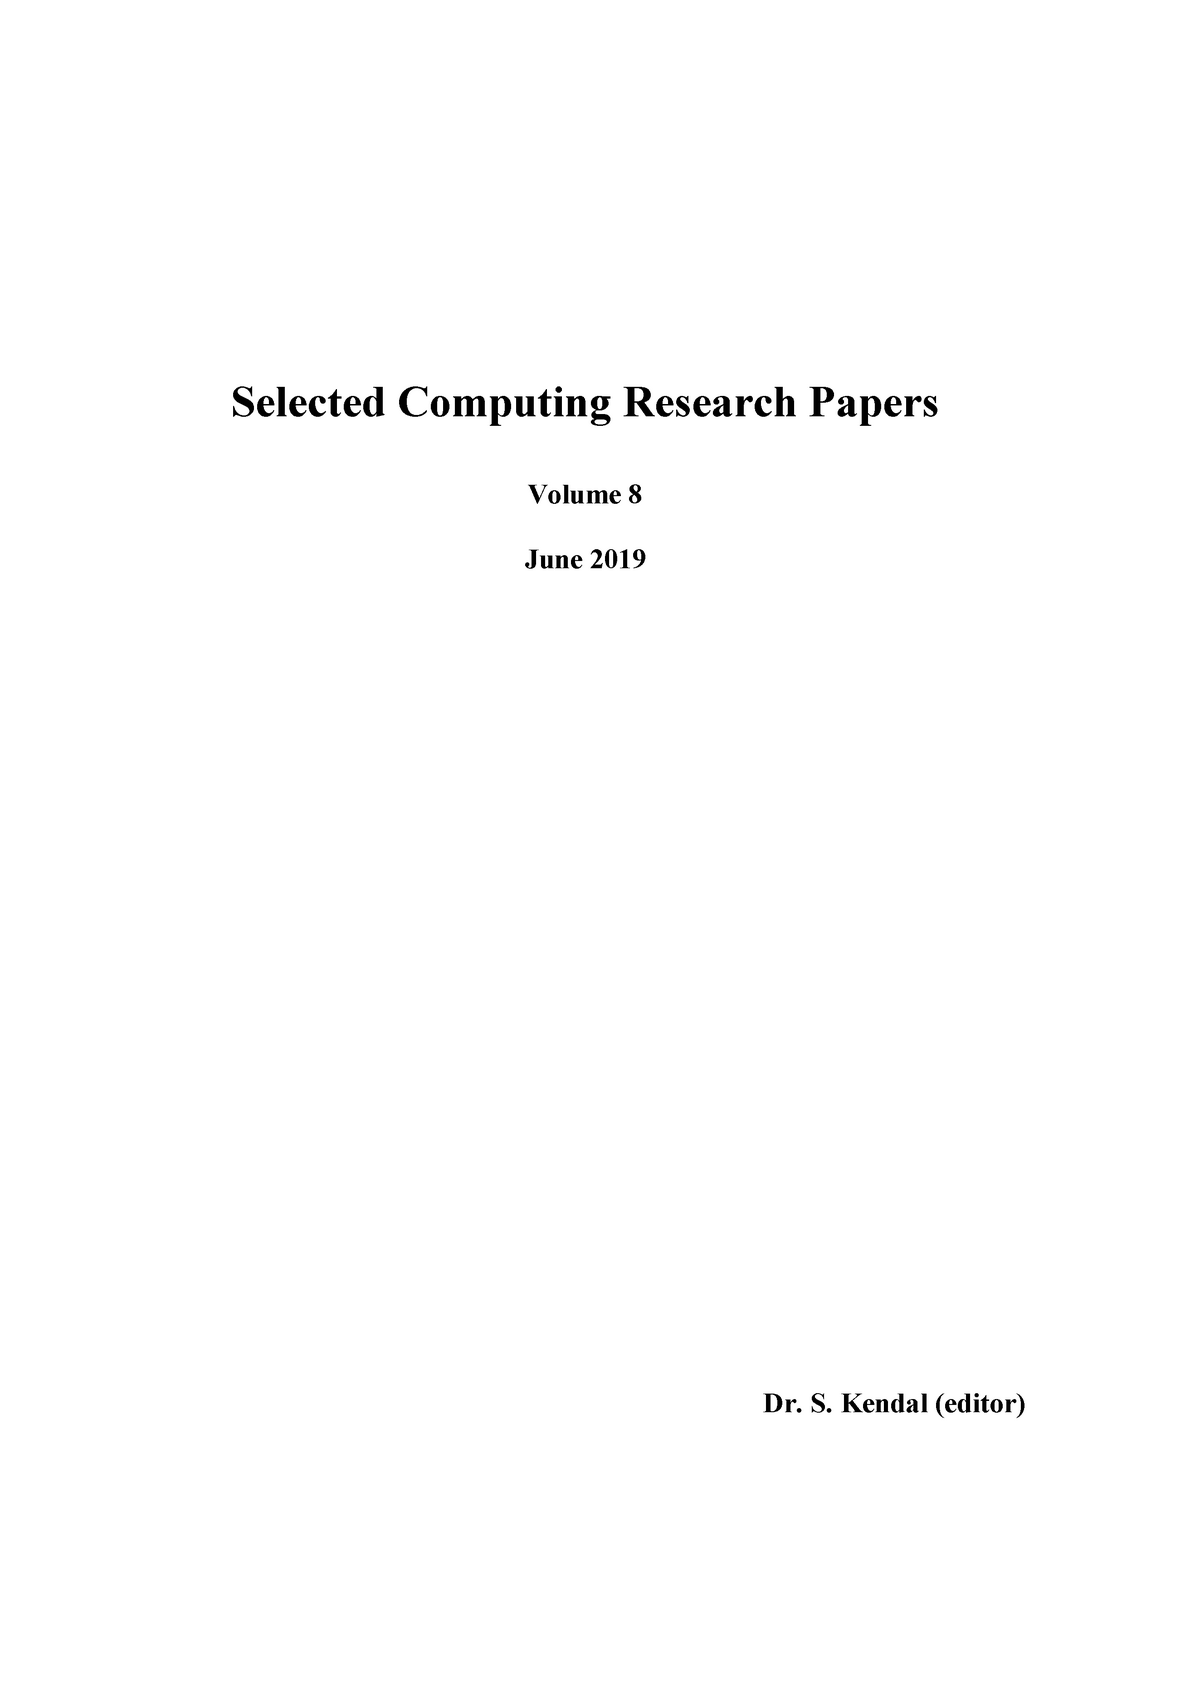 recently published research papers in computer science